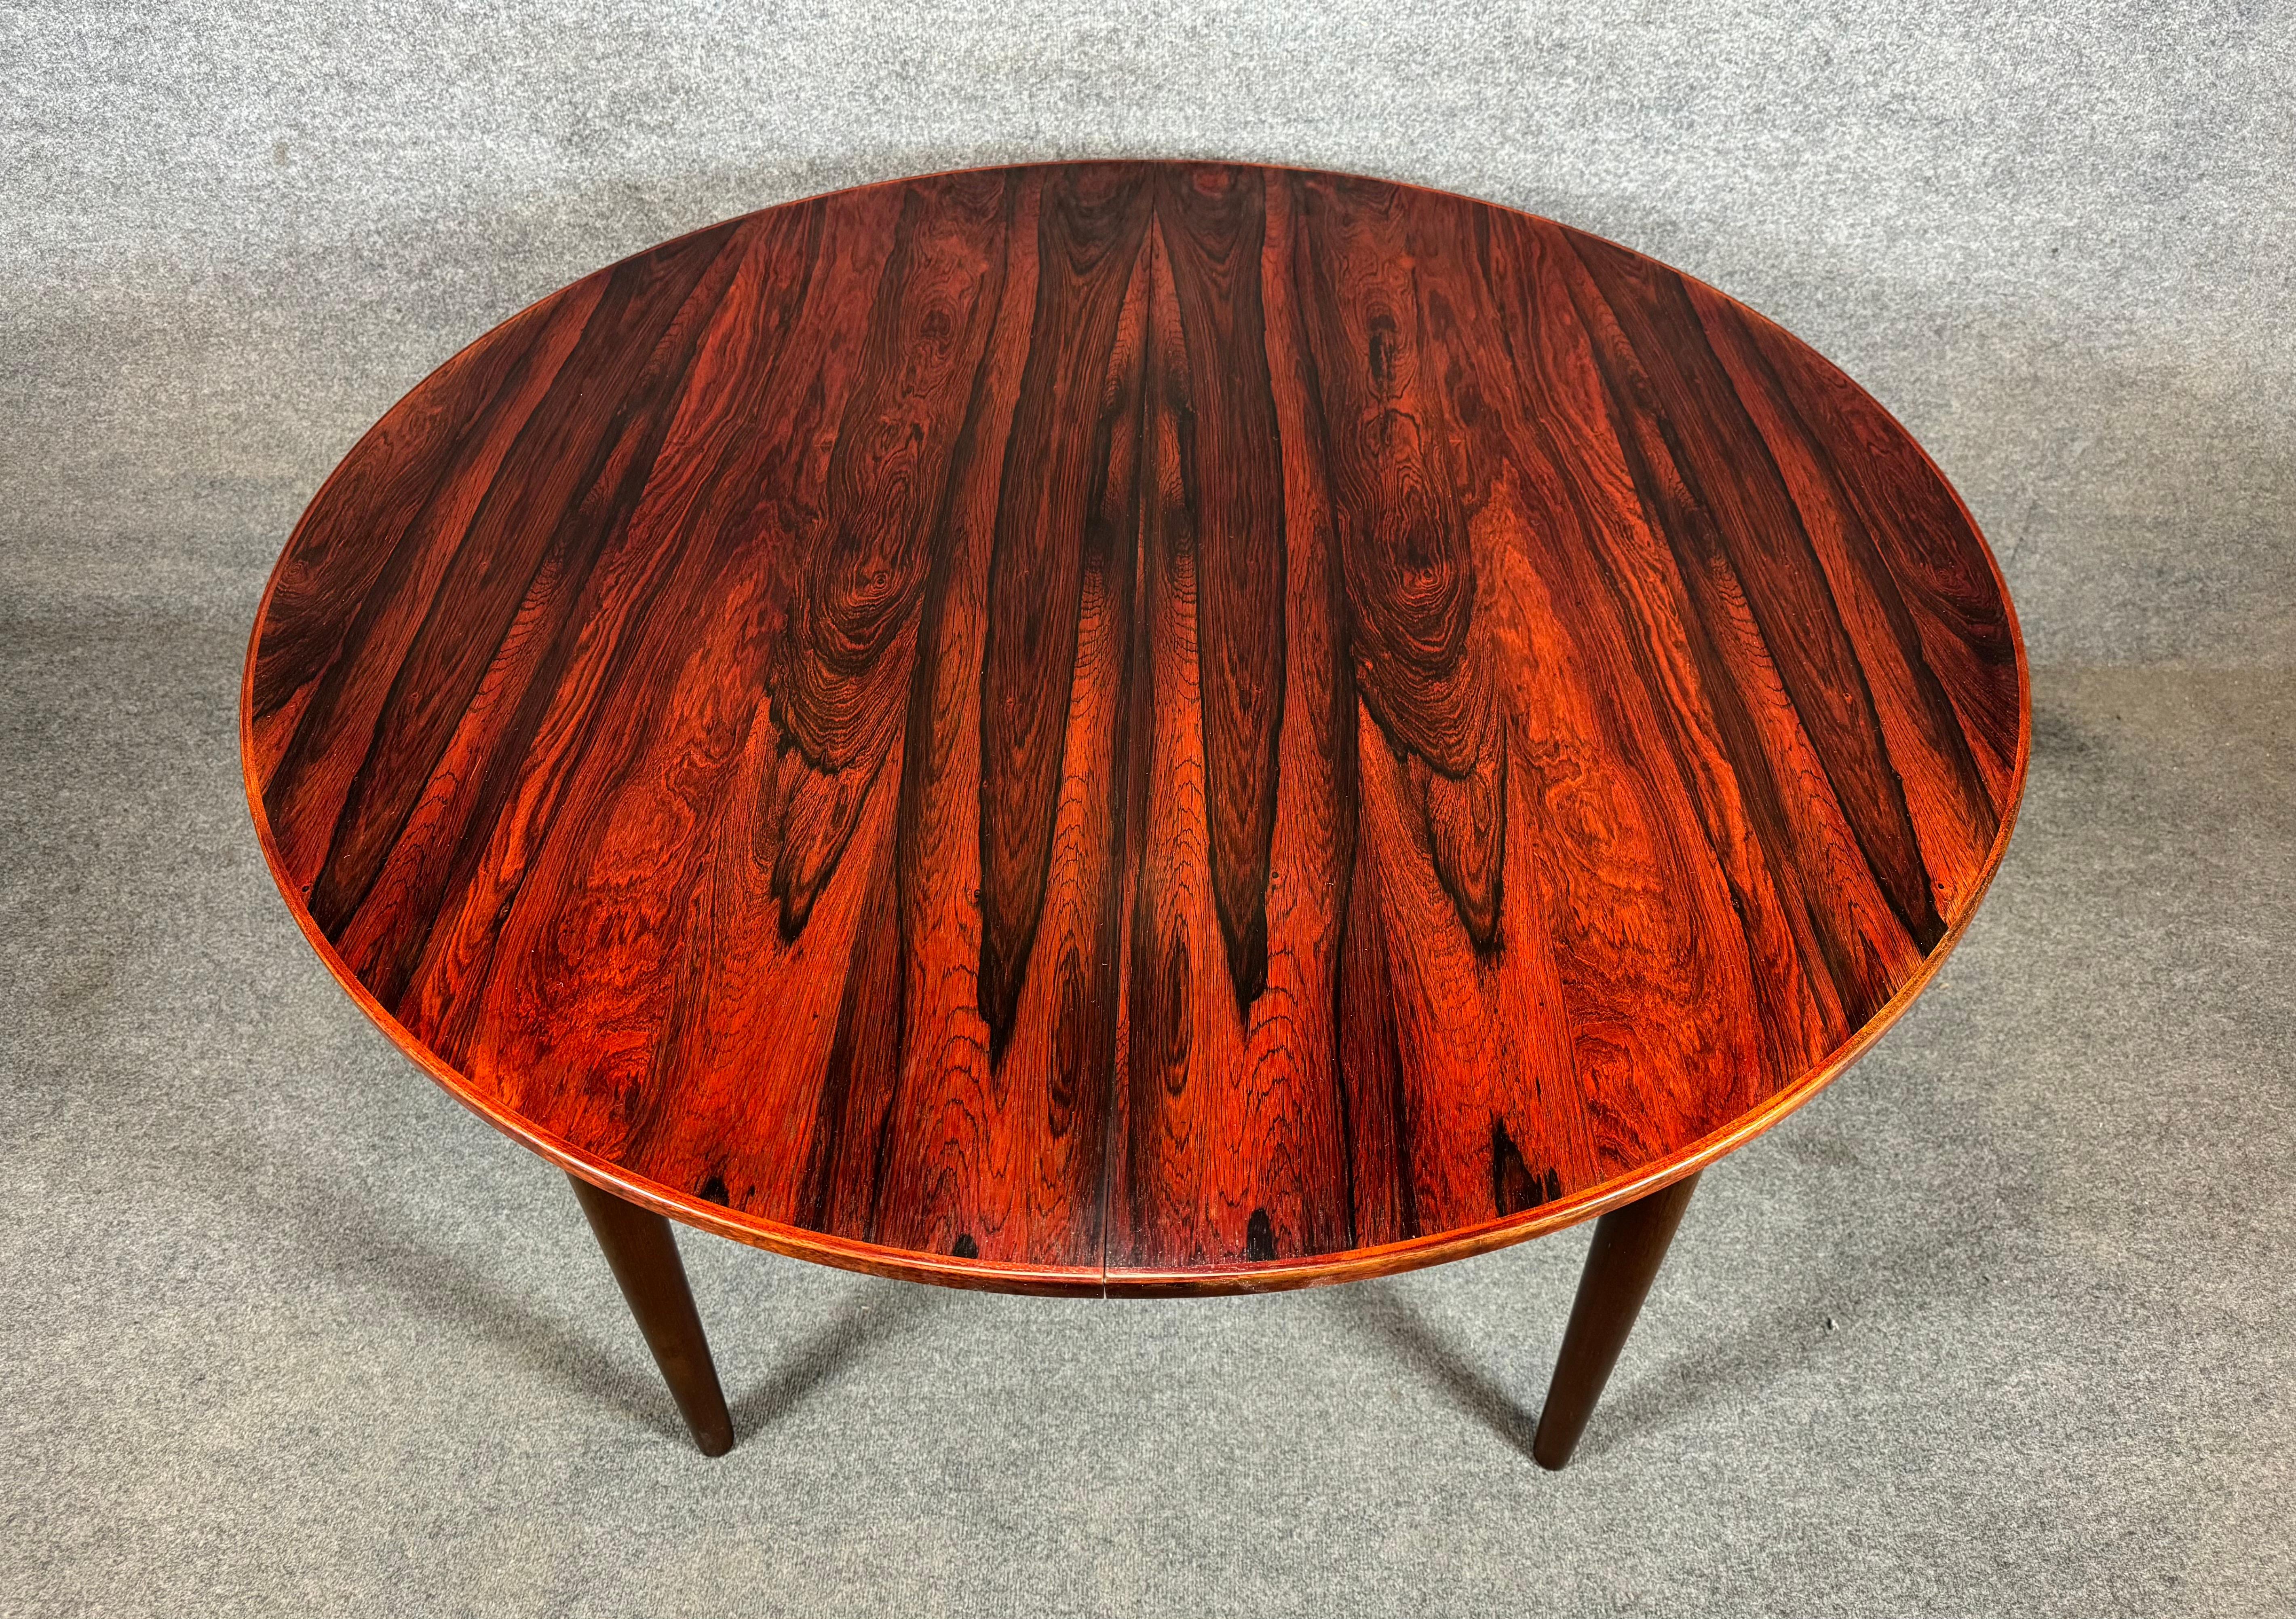 Here is a beautiful scandinavian modern dining table in rosewood manufactured in Denmark in the 1960's .
This lovely table, recently imported from Europe to California before its refinishing, features lively grain details, two inserts leaves and